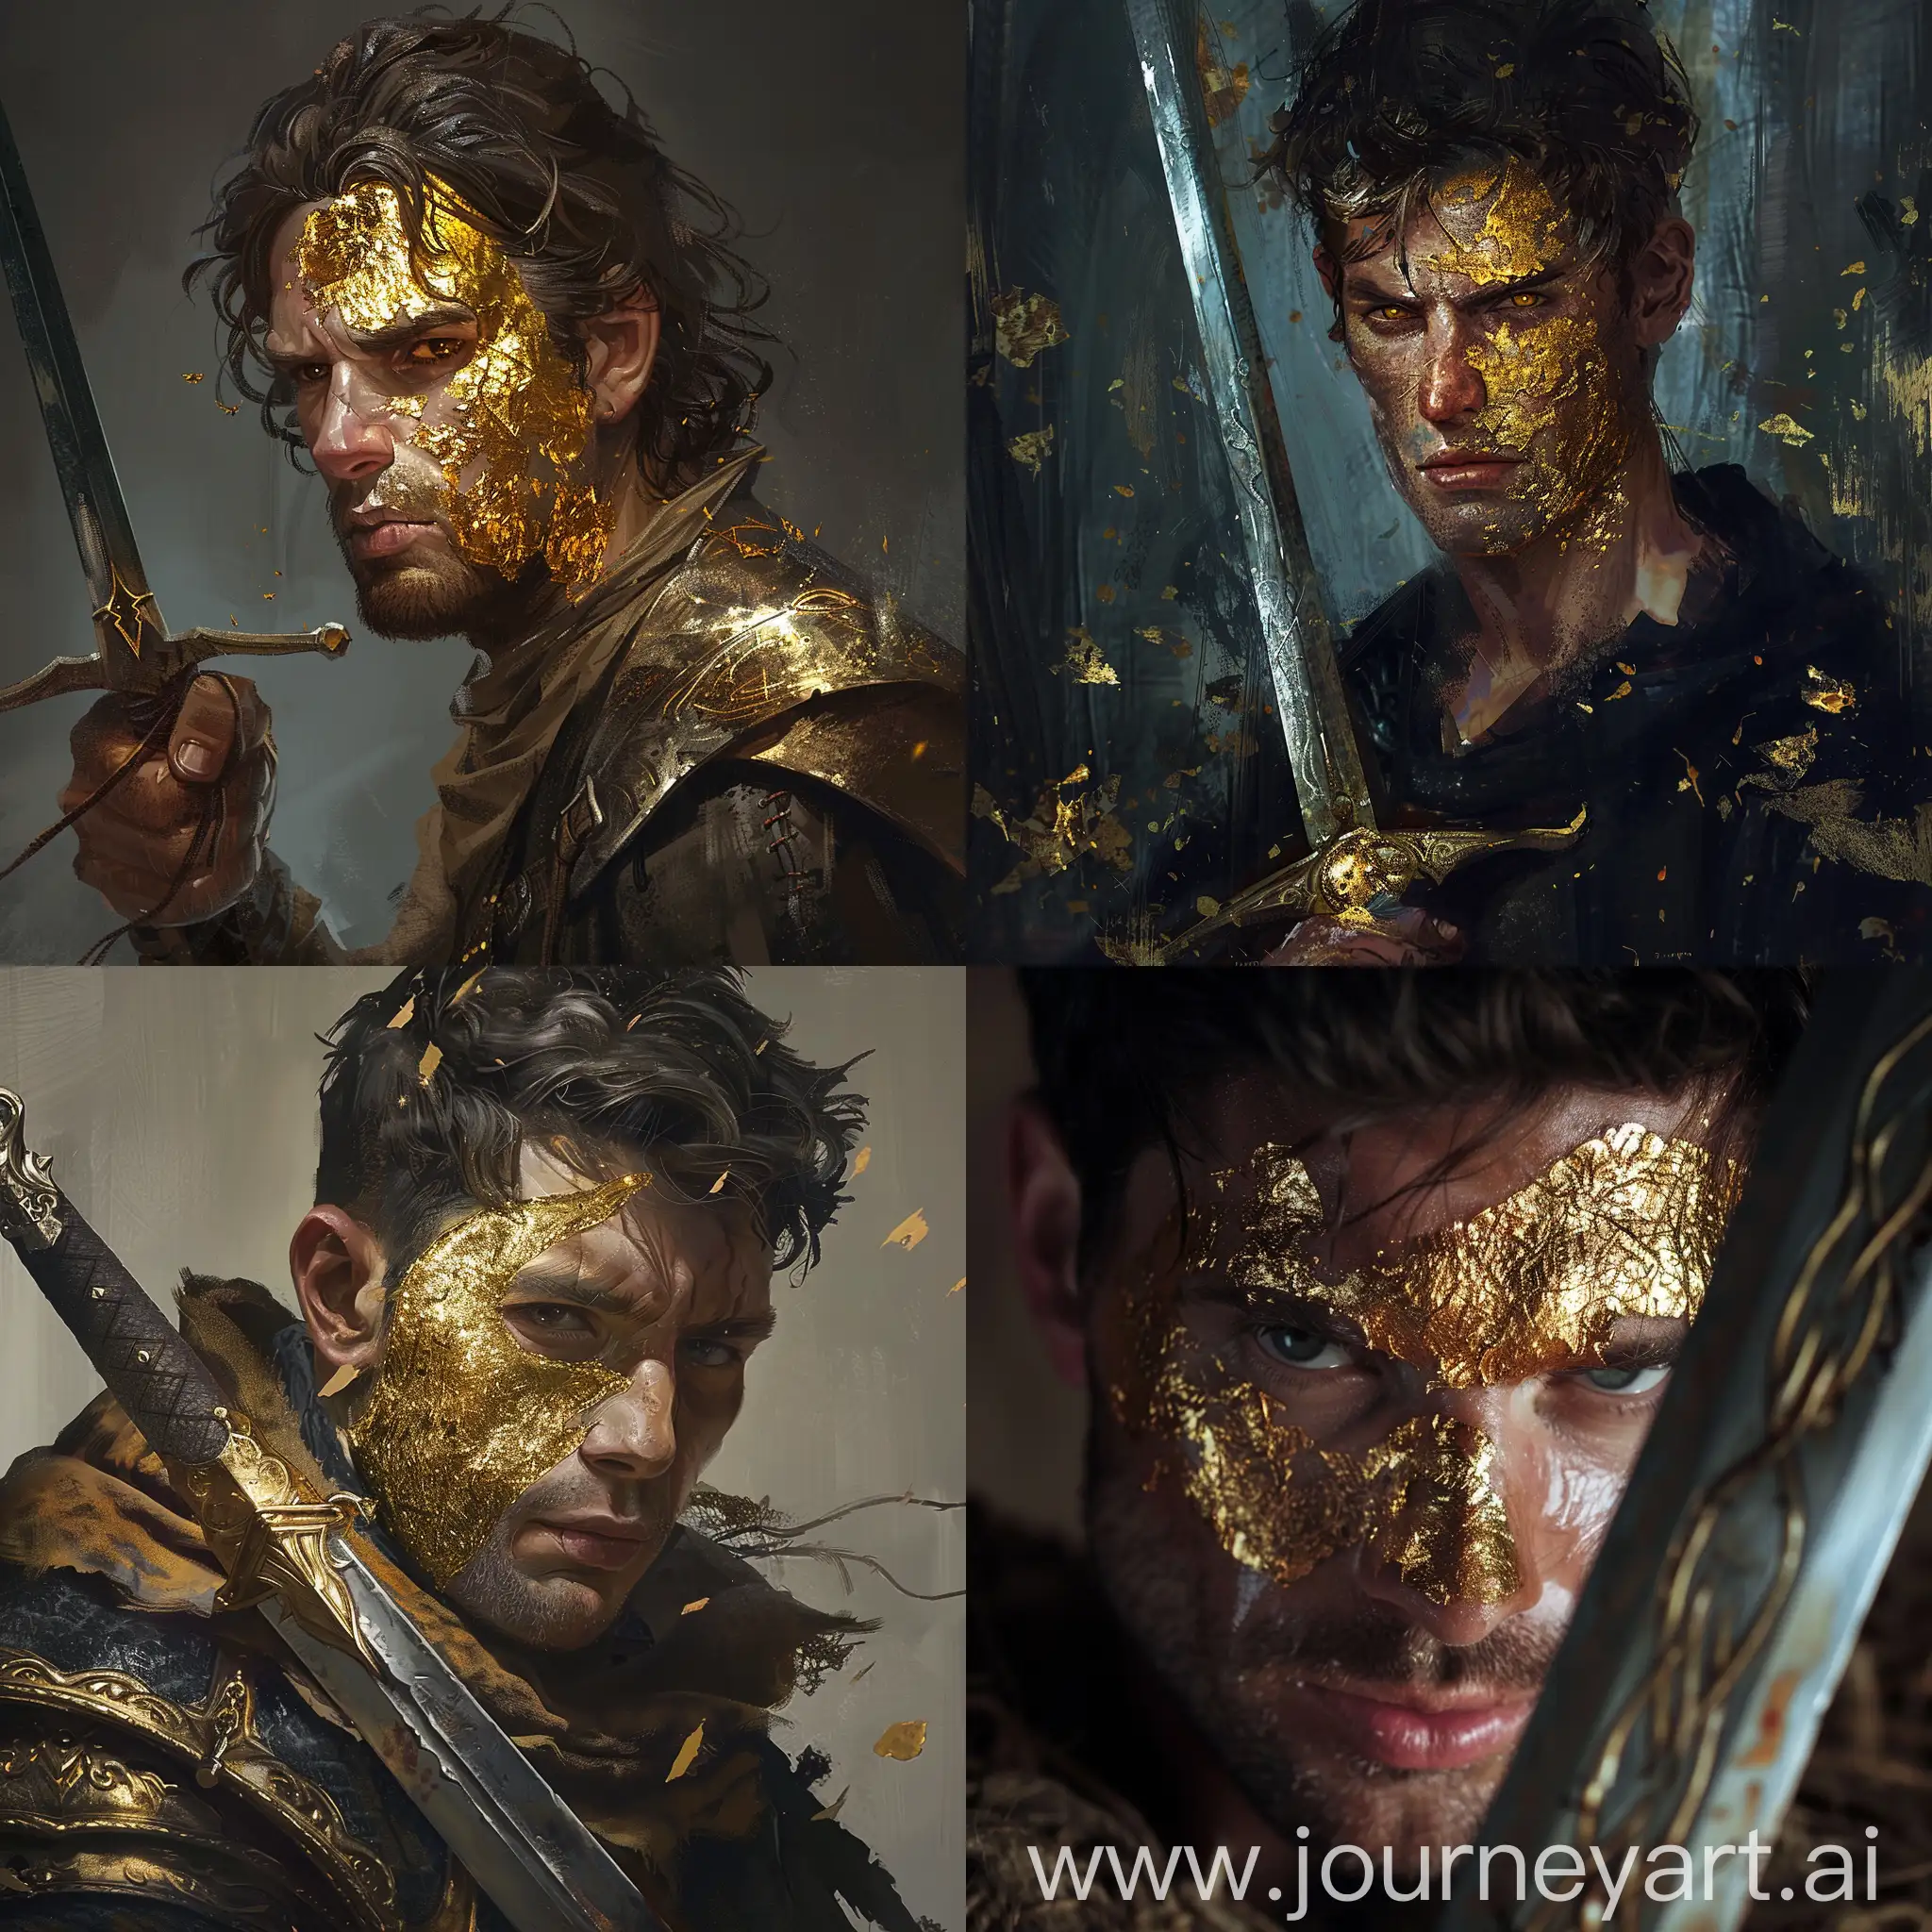 Man with a scar made of gold in his face, wielding a sword.